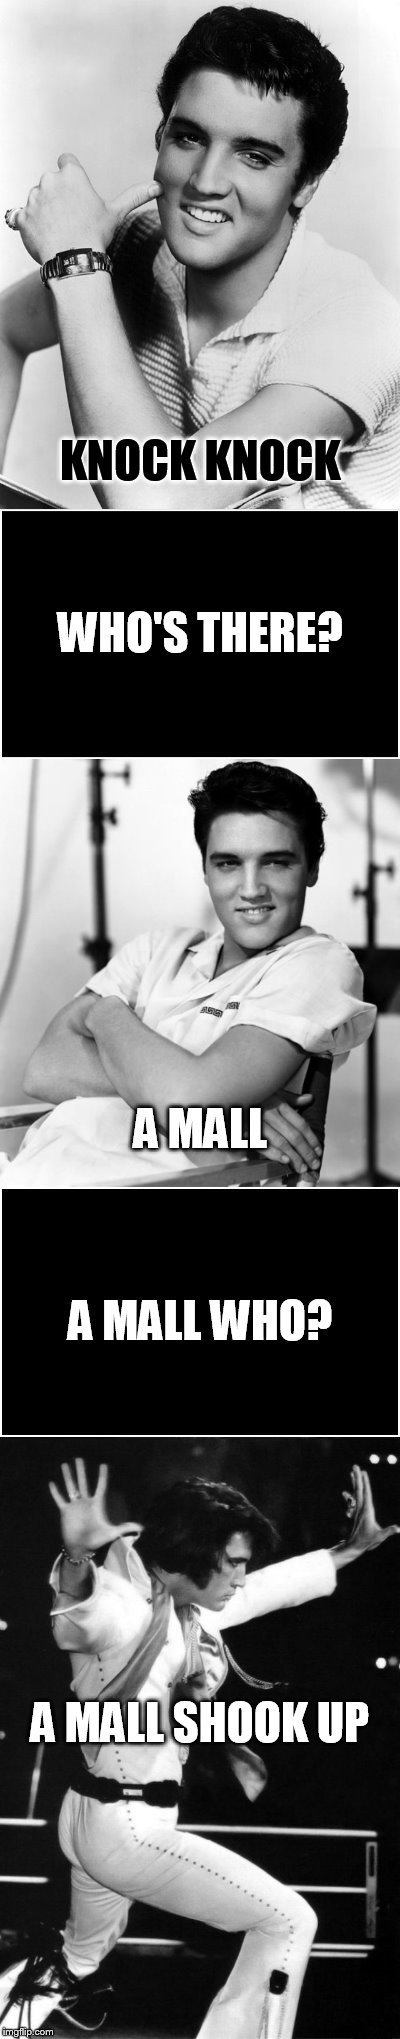 KNOCK KNOCK A MALL SHOOK UP WHO'S THERE? A MALL A MALL WHO? | made w/ Imgflip meme maker